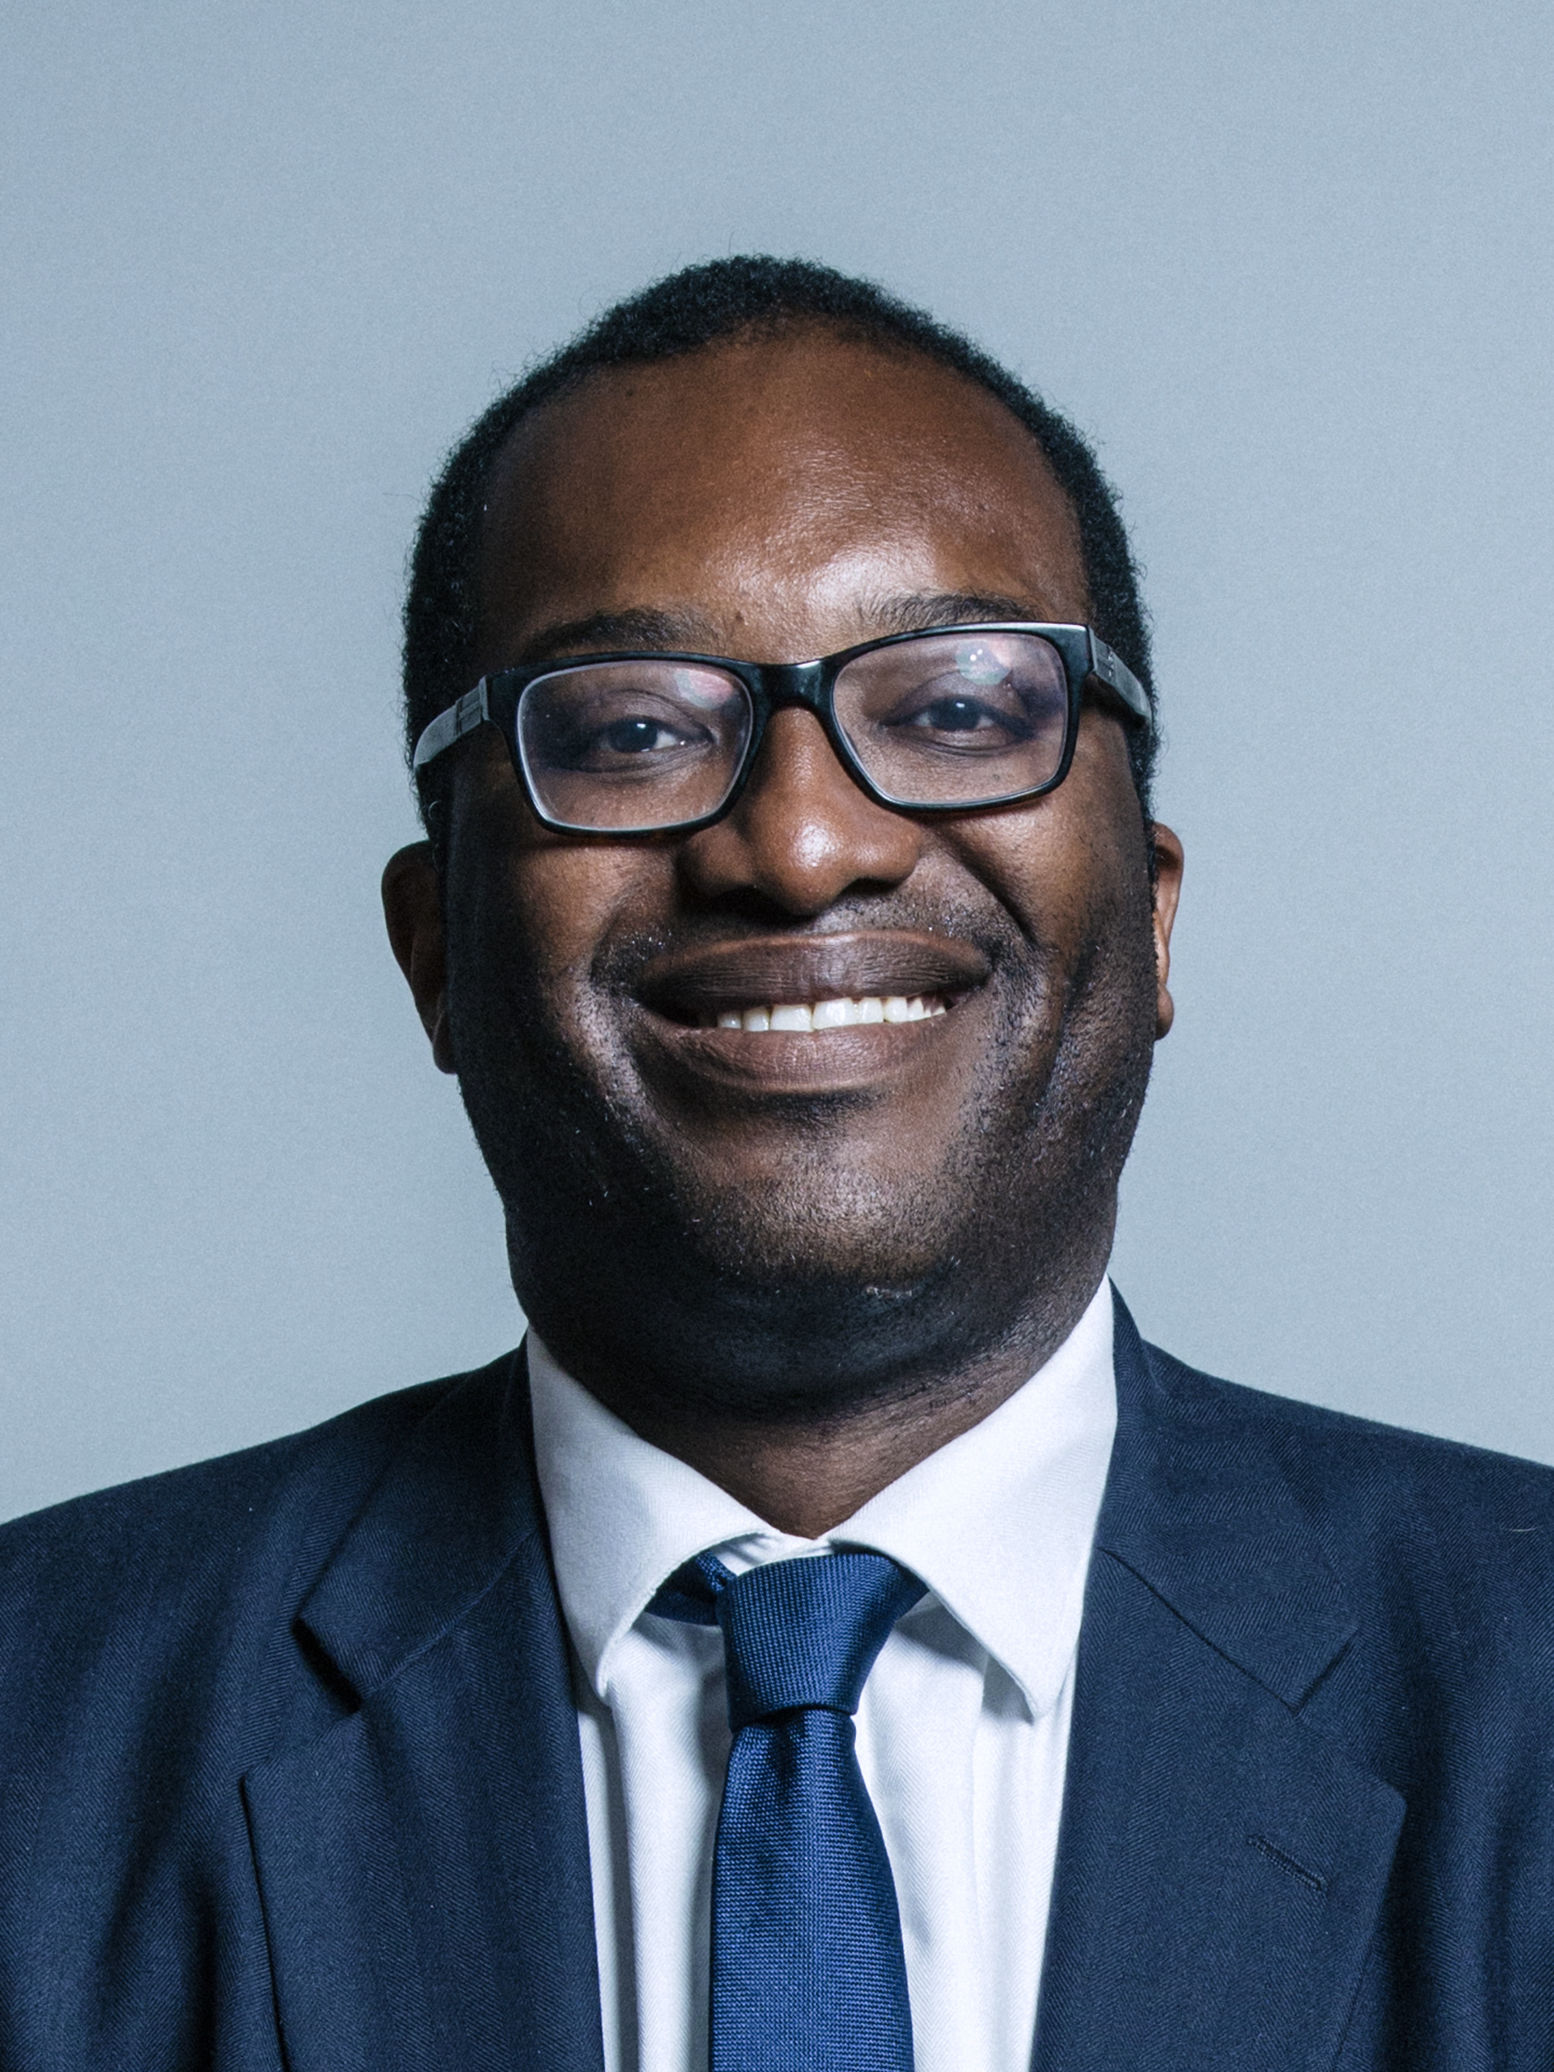 UK energy minister Kwarteng: Energy windfall tax not necessarily the right move 